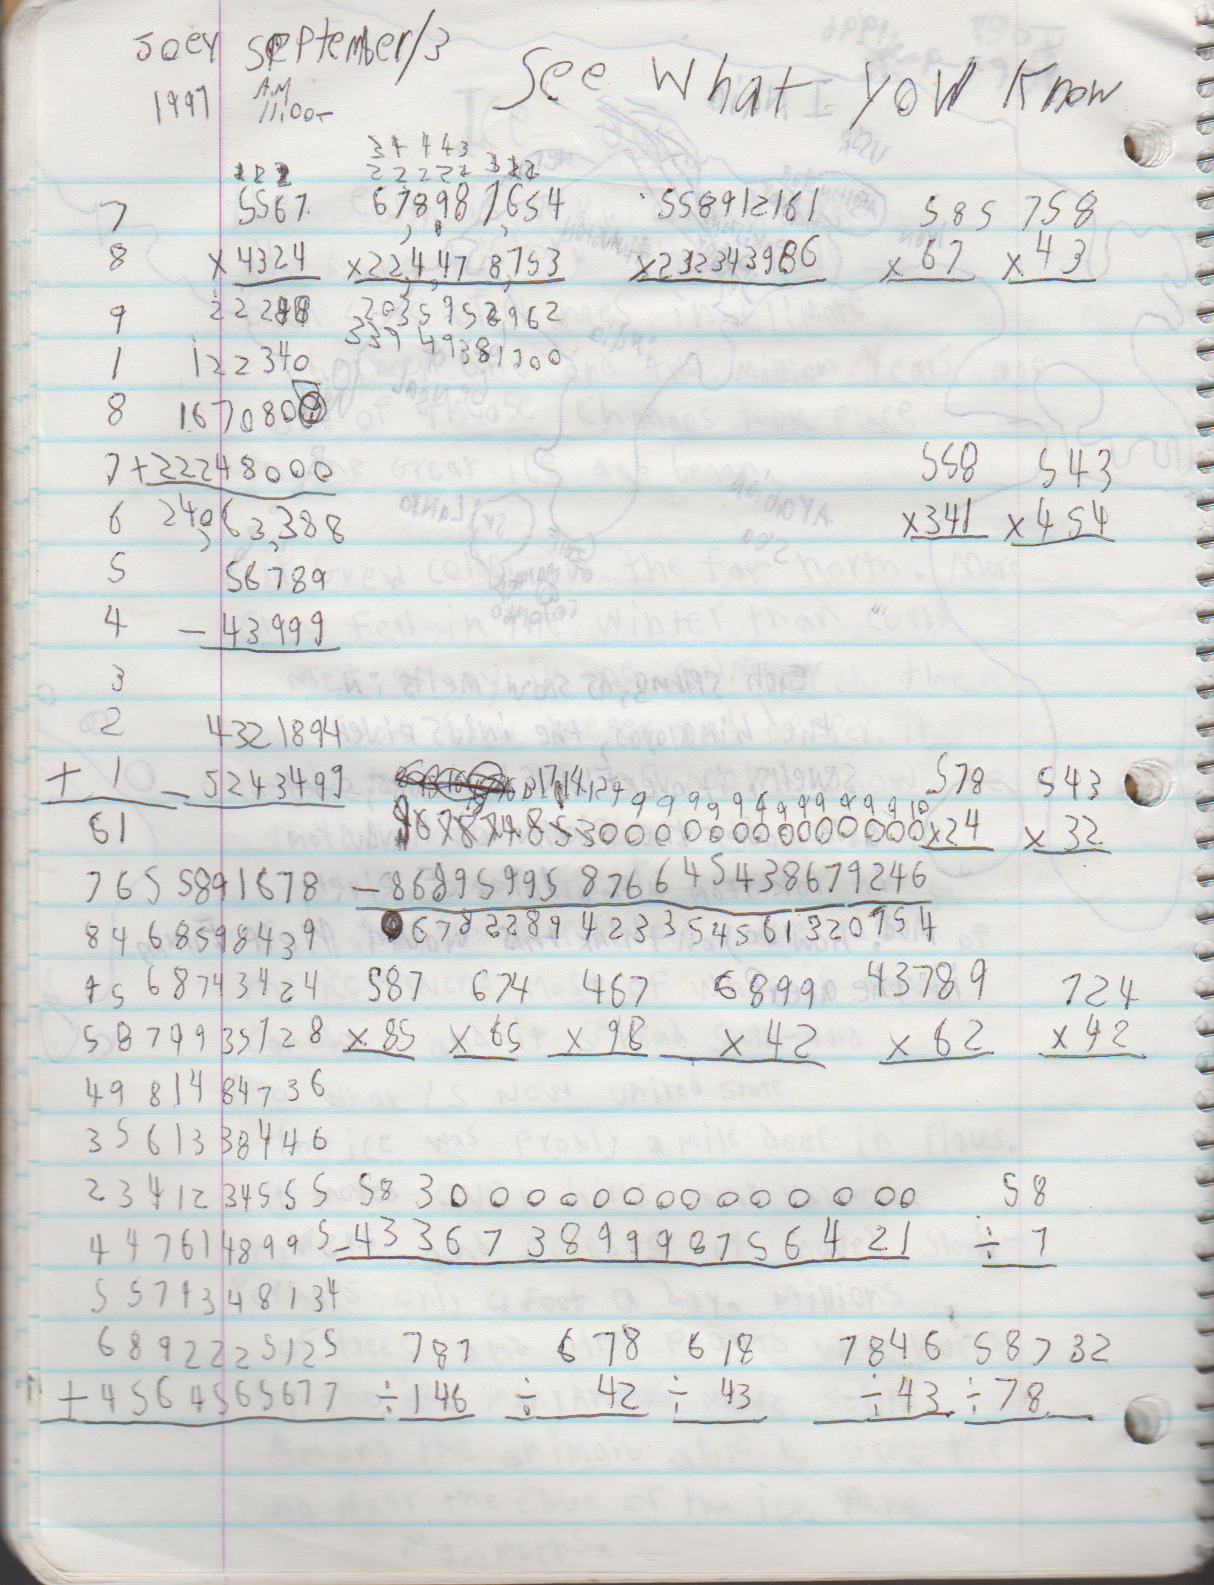 1996-08-18 - Saturday - 11 yr old Joey Arnold's School Book, dates through to 1998 apx, mostly 96, Writings, Drawings, Etc-024.png